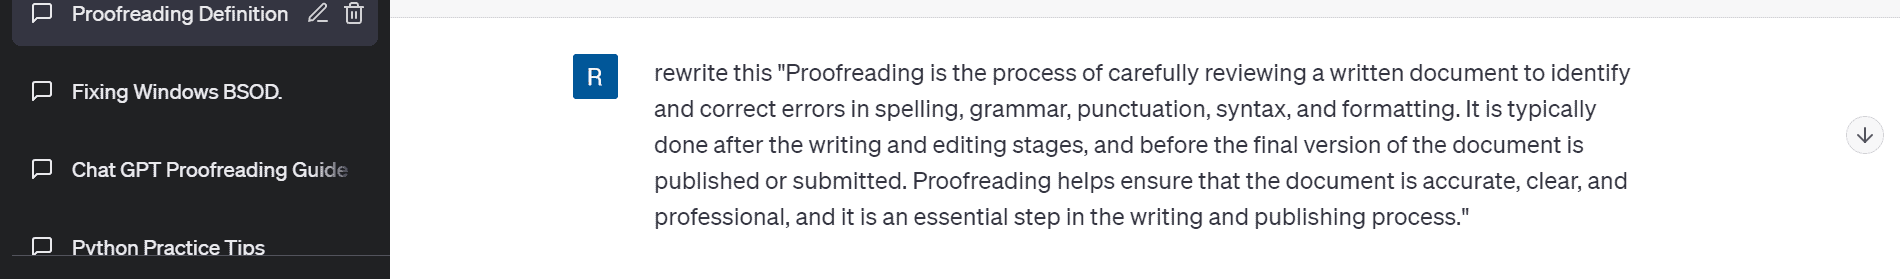 Use of Chat GPT for Proofreading